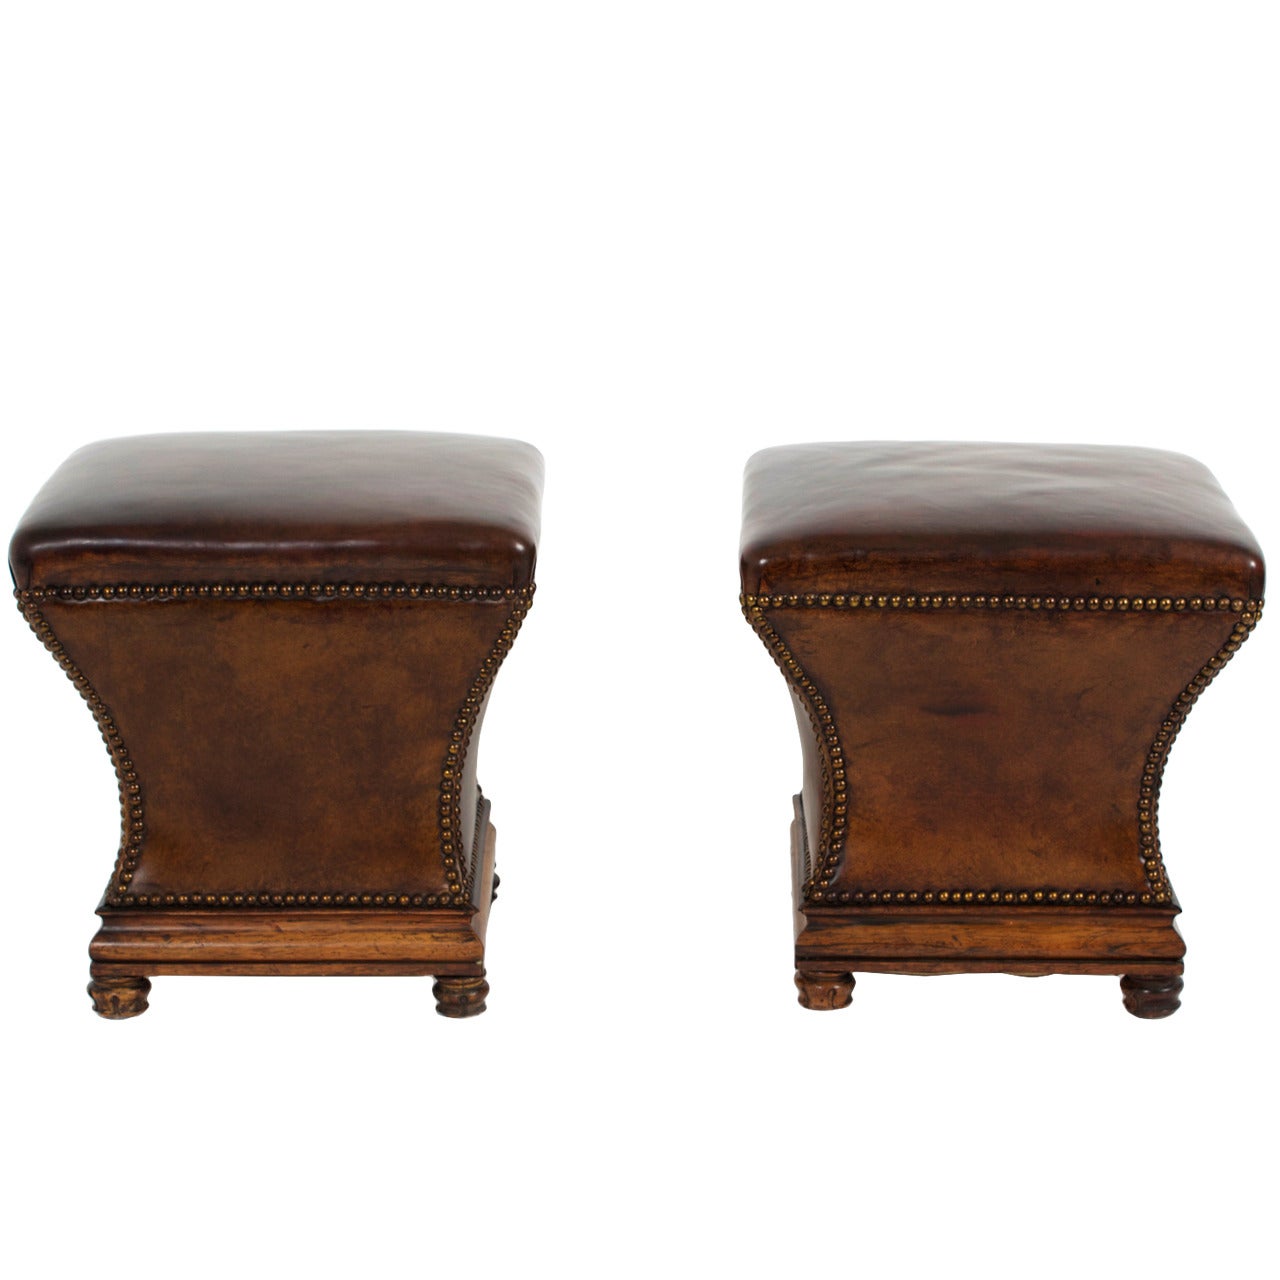 Pair of Late 19th-Early 20th Century Leather Brass Tacked Ottomans or Stools